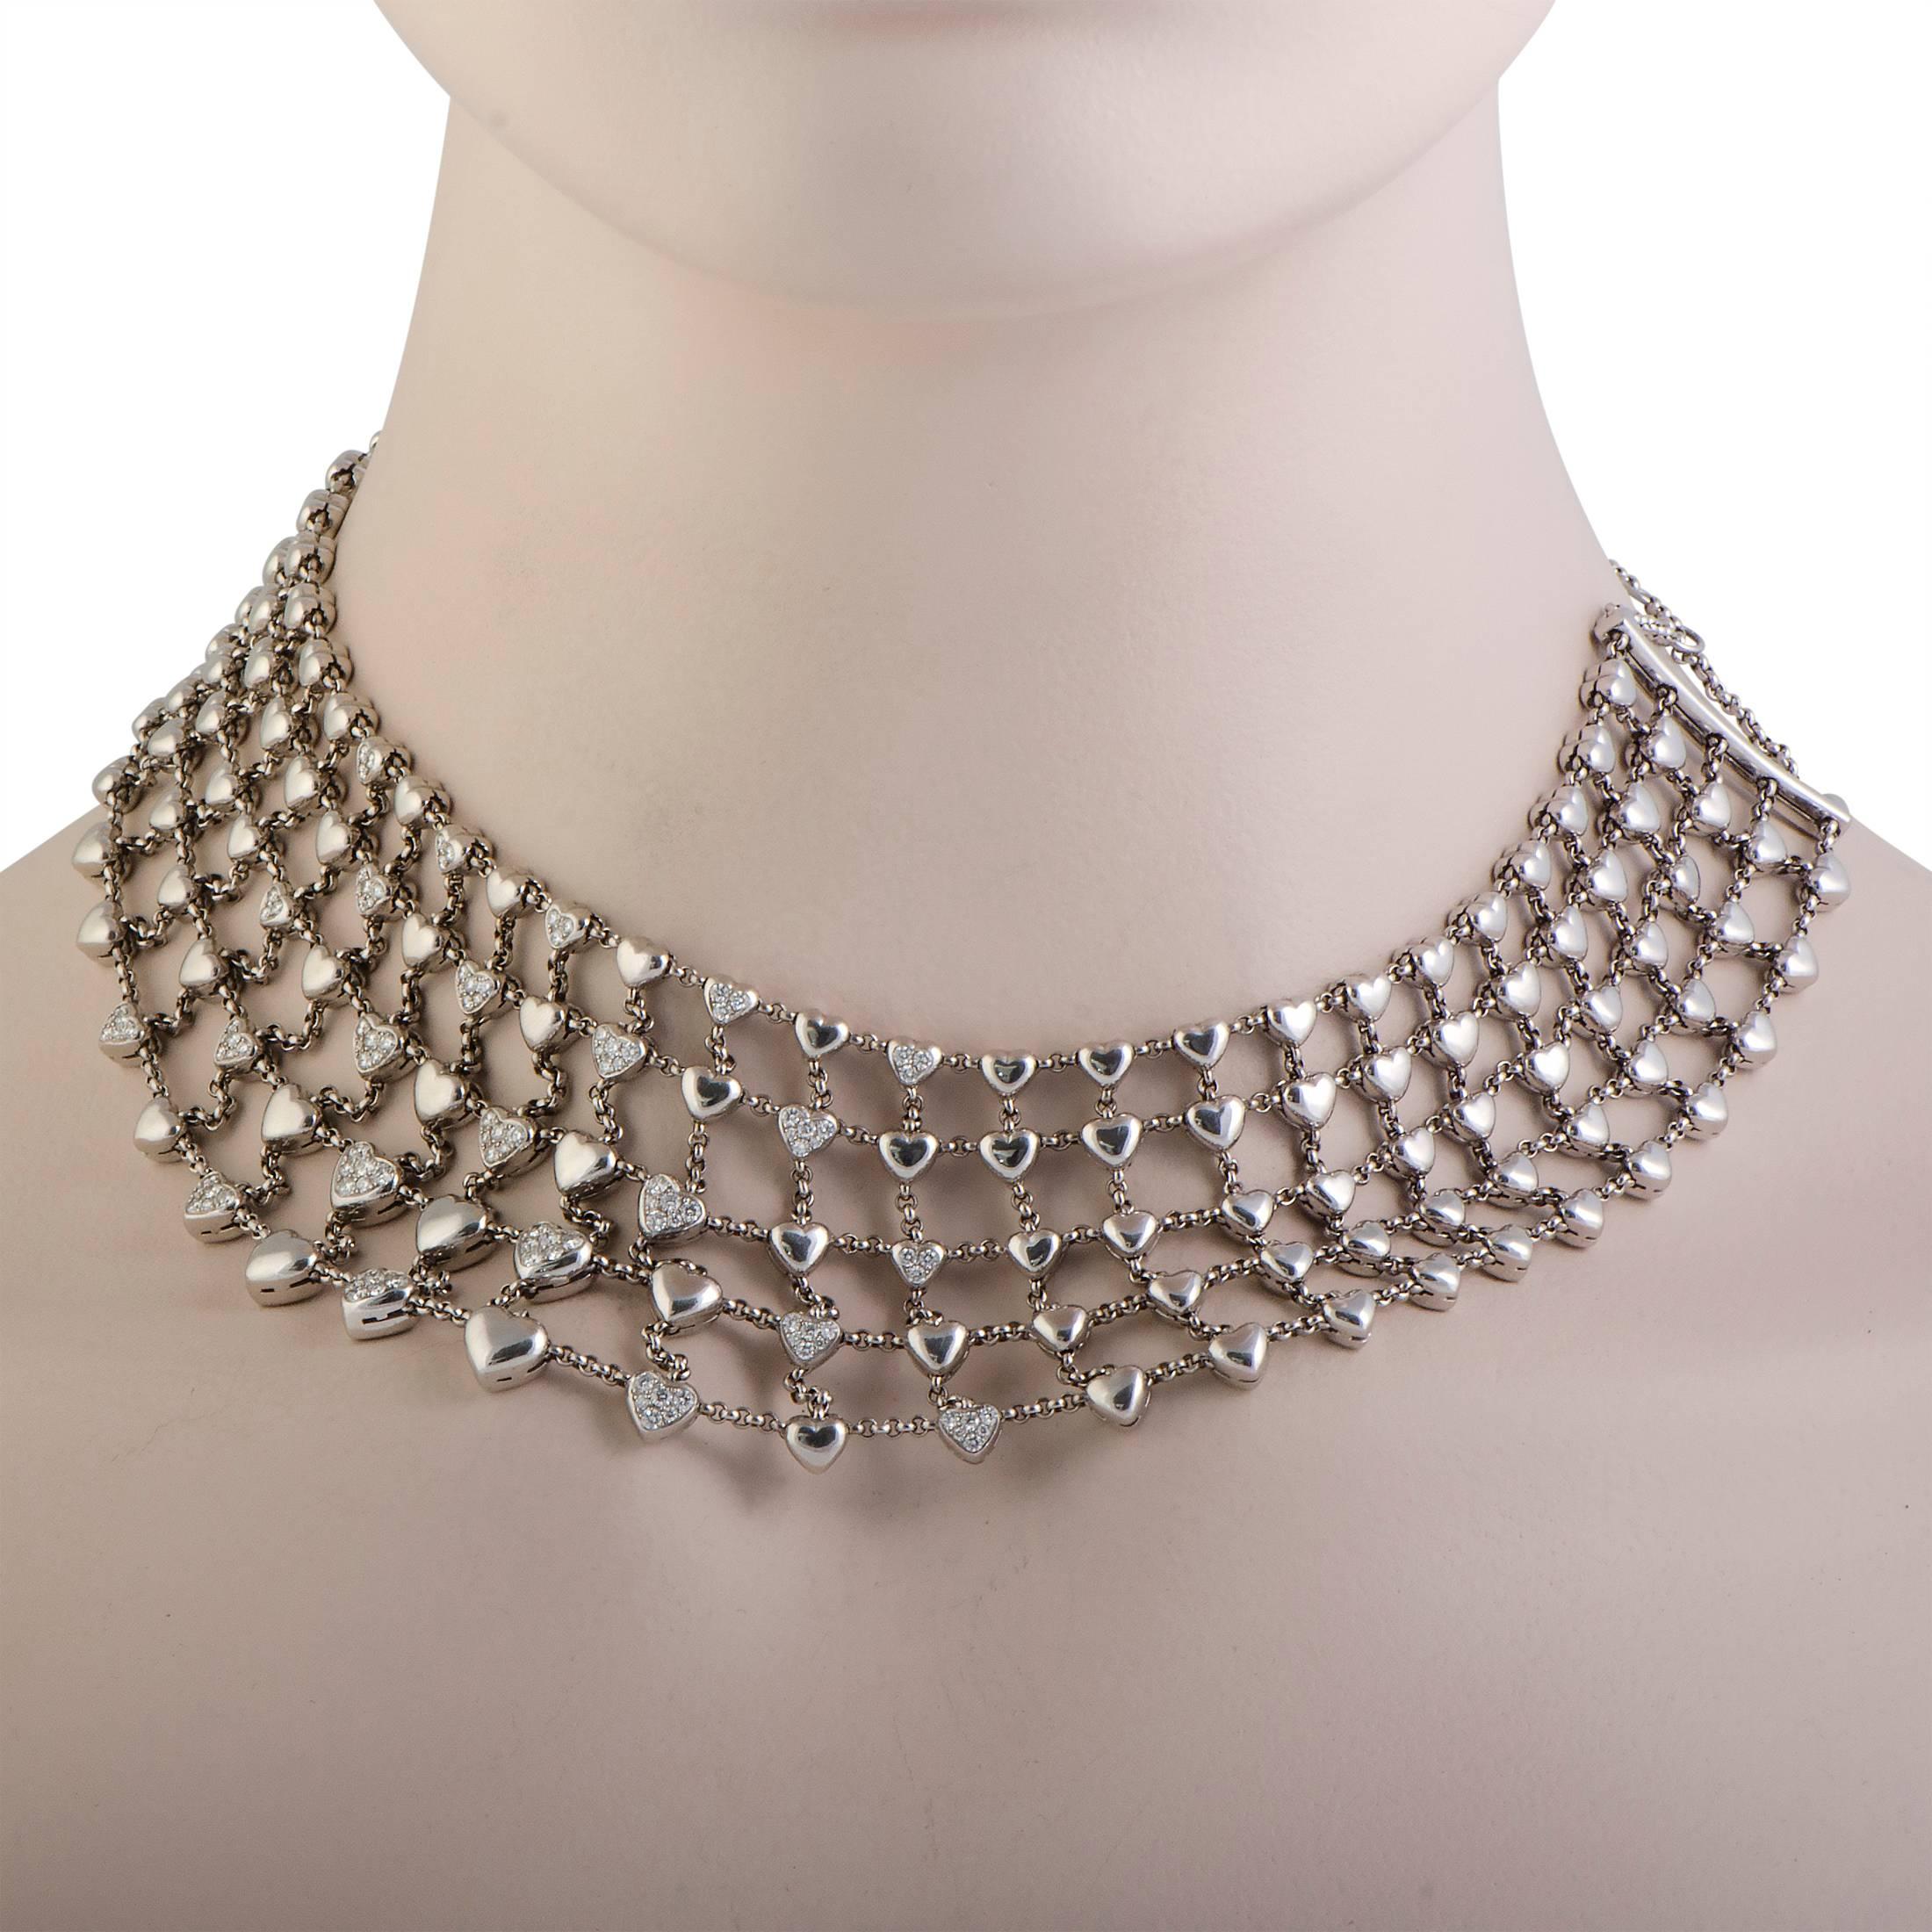 This stunning 18K white gold bib necklace by Chopard is the perfect accessory for your outfit! The spectacular design includes layers of dazzling diamond studded hearts that give the necklace an extravagantly stylish appeal. The total diamond carat